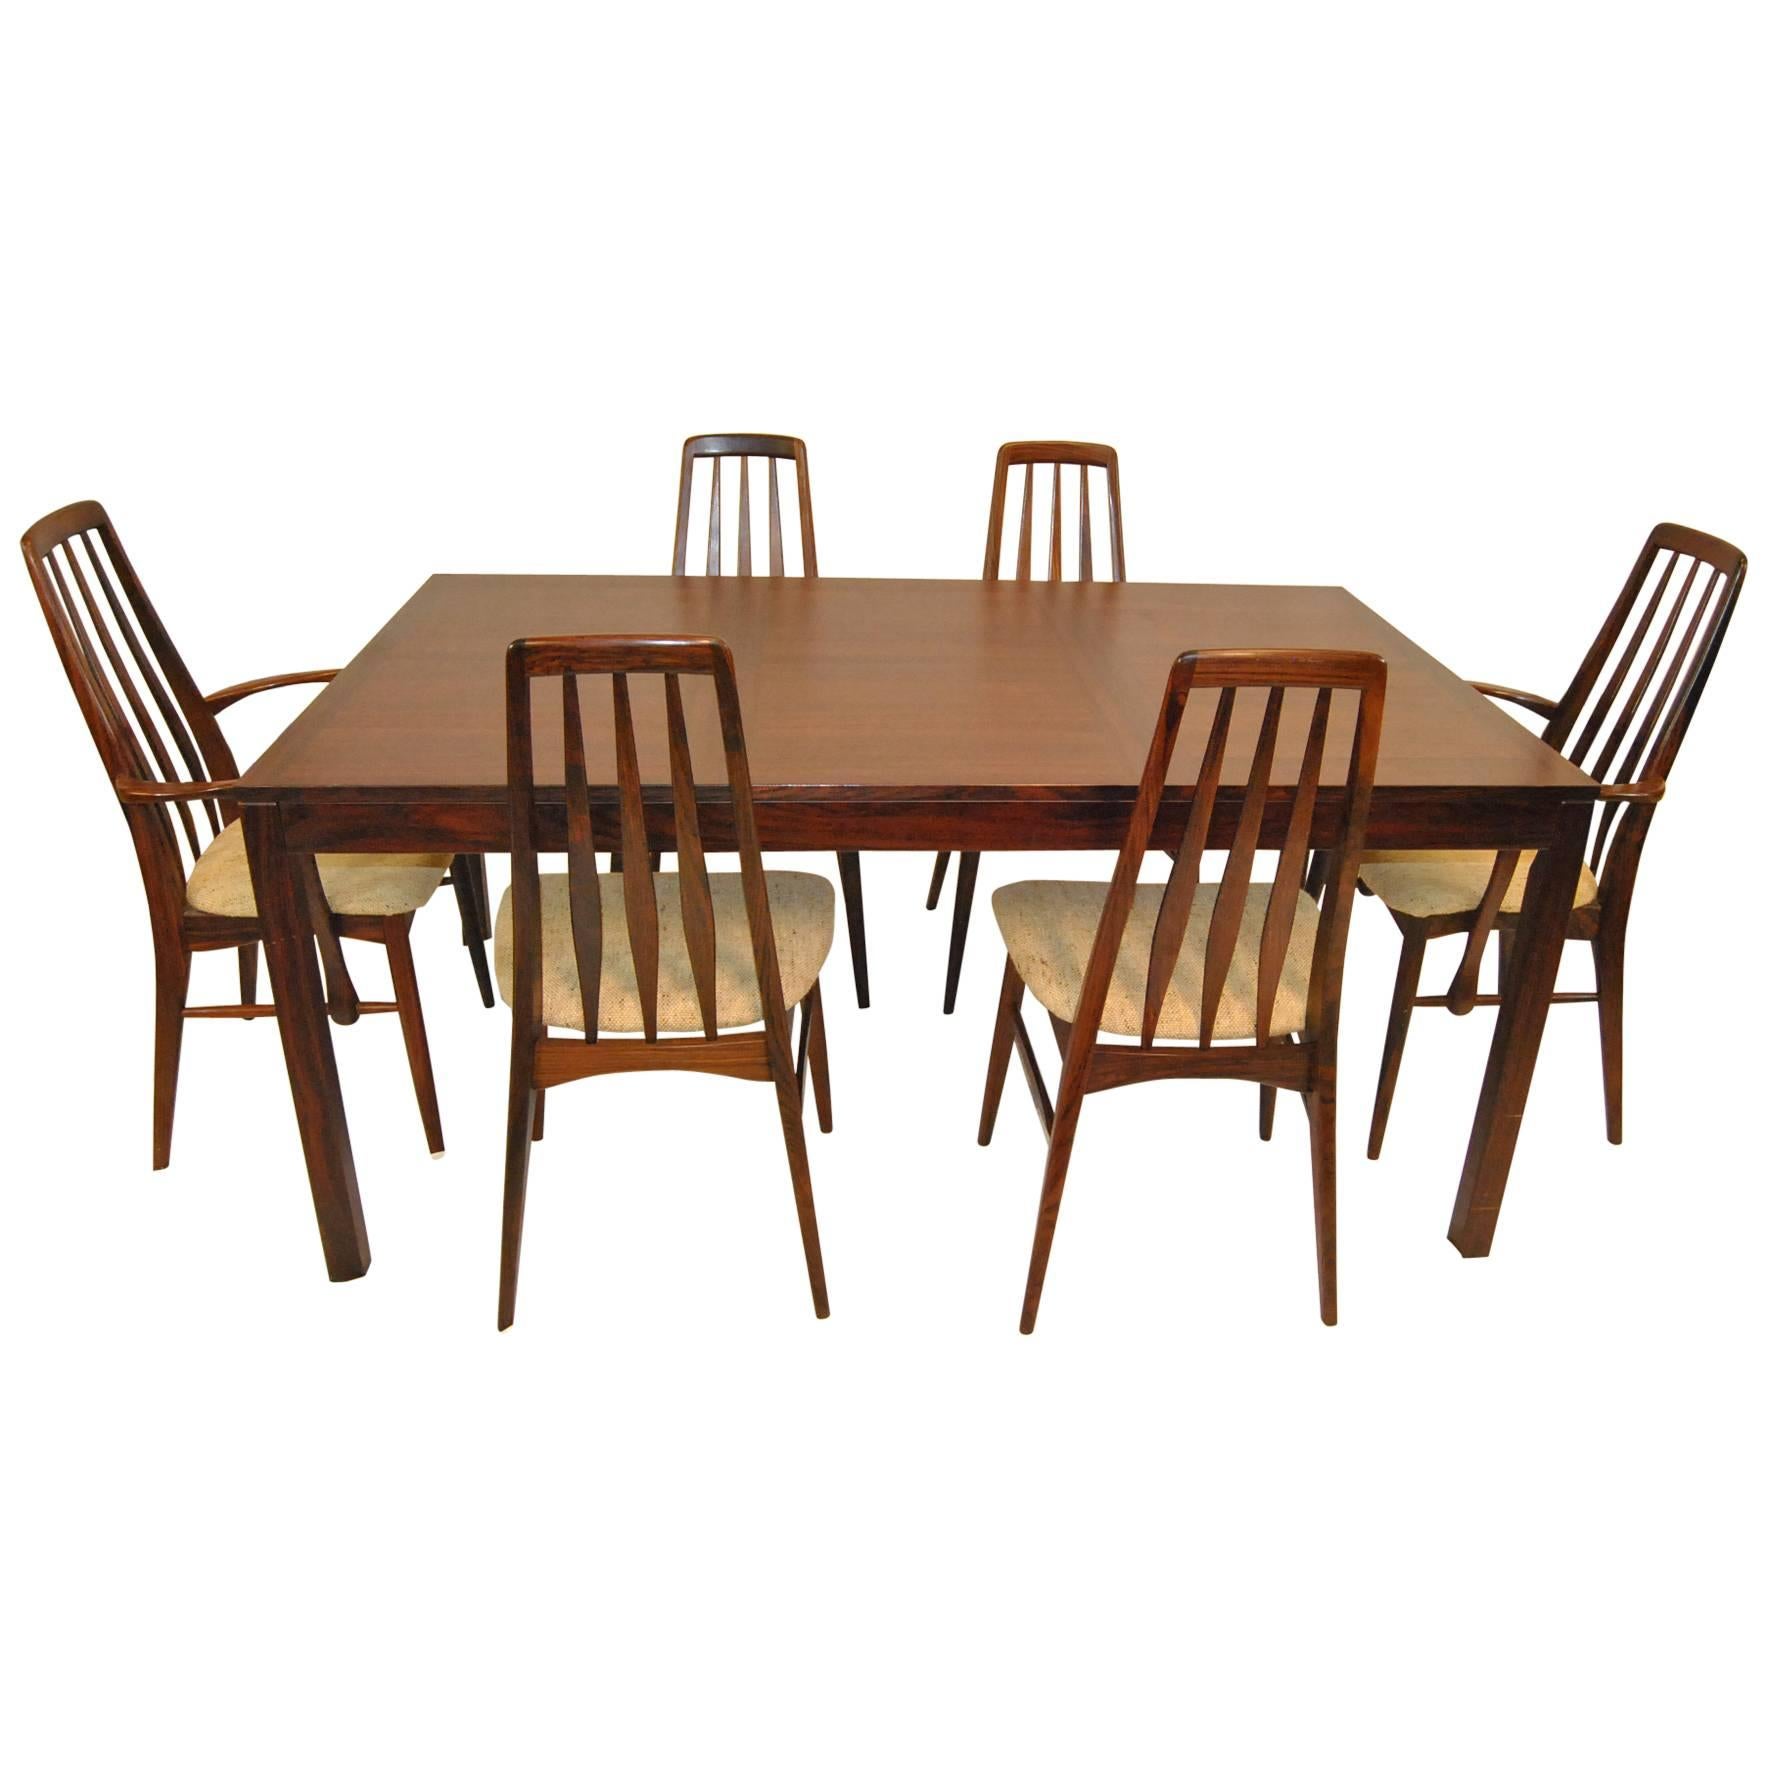 Mid-Century Rosewood Vejle Stole Table and Six Eva Chairs by Koefoeds Hornslet